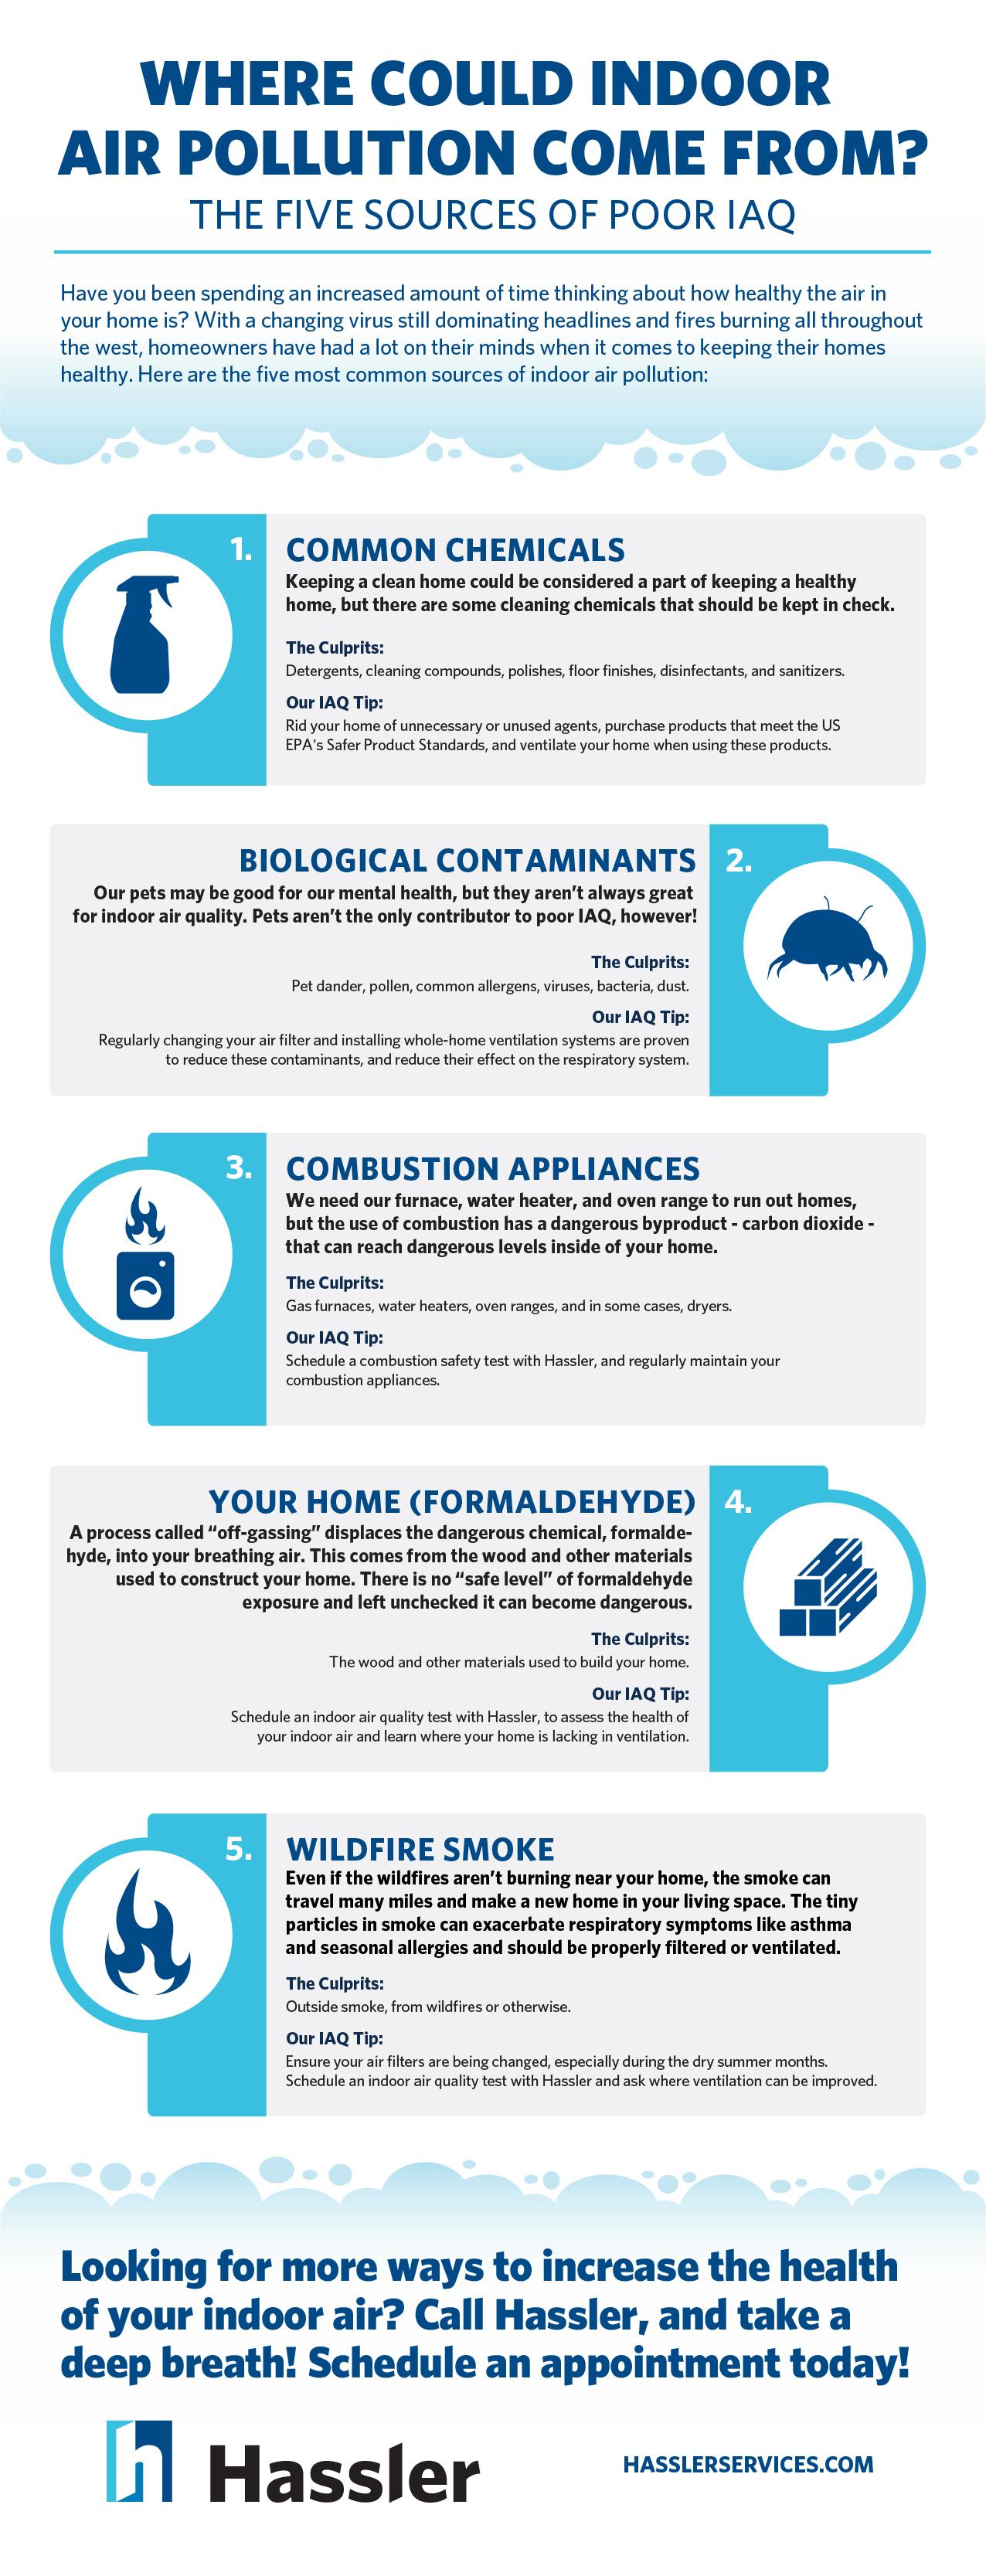 Hassler Infographic Detailing the 5 Most Common Sources of Indoor Air Pollution